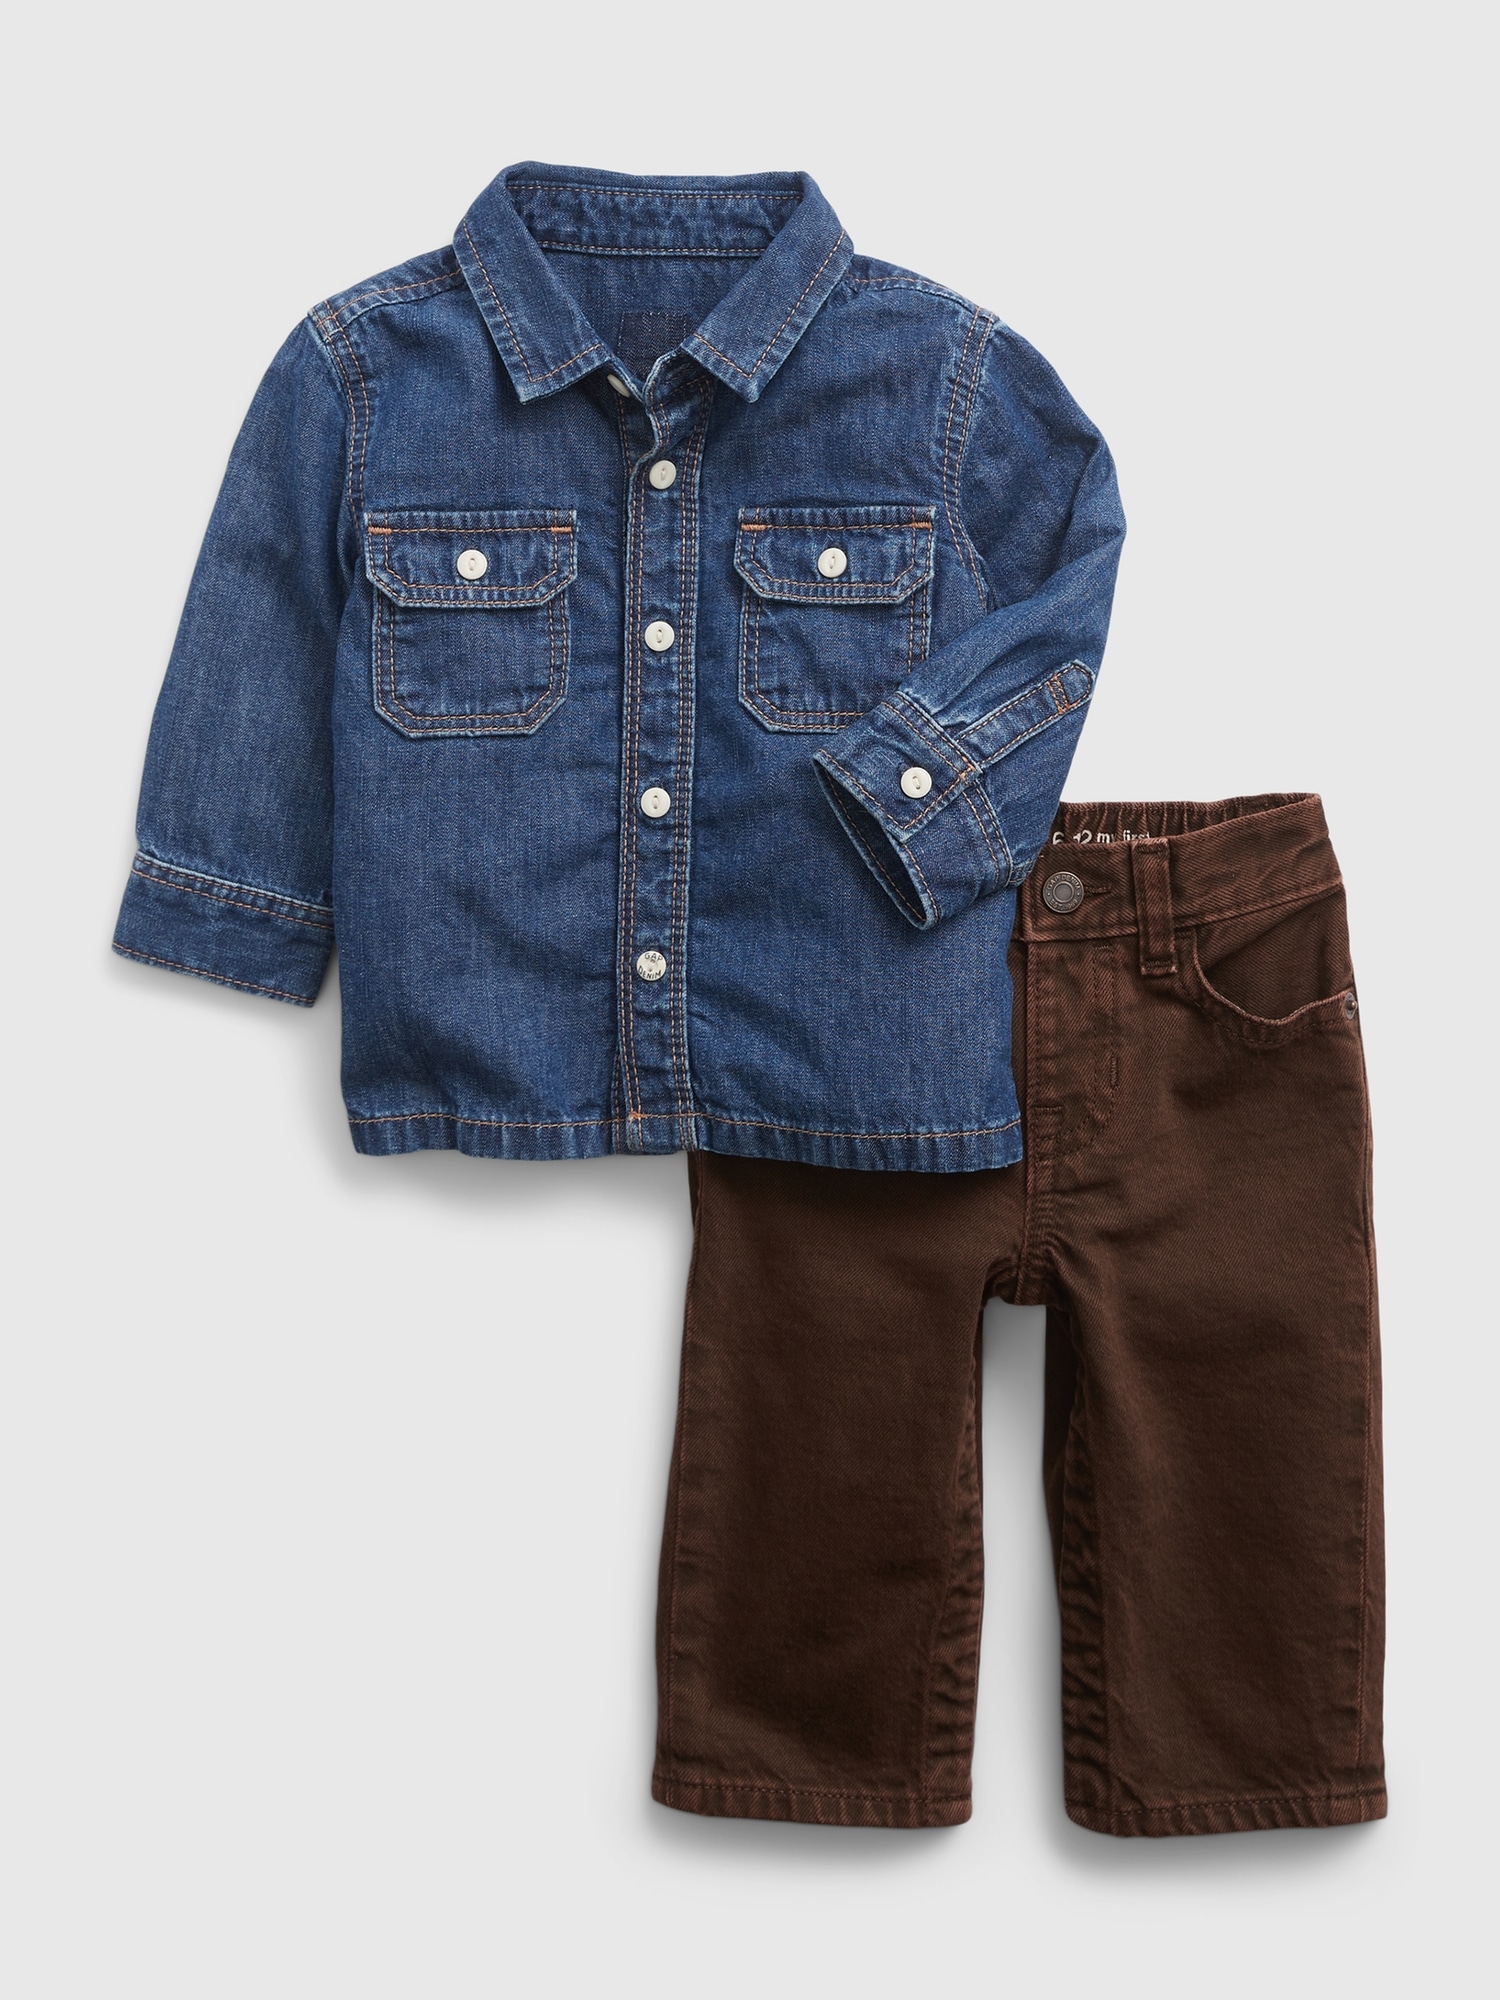 Gap Baby 2-Piece Outfit Set